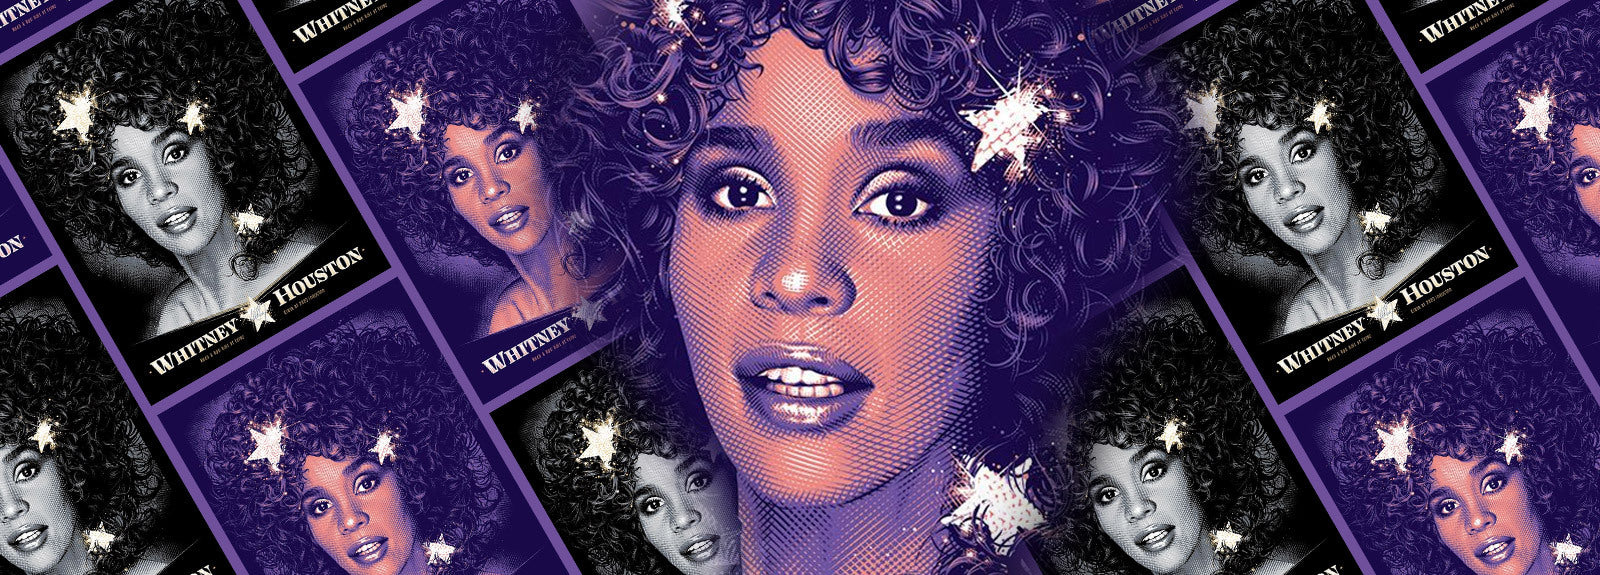 Behind the Poster: Whitney Houston Hall of Fame